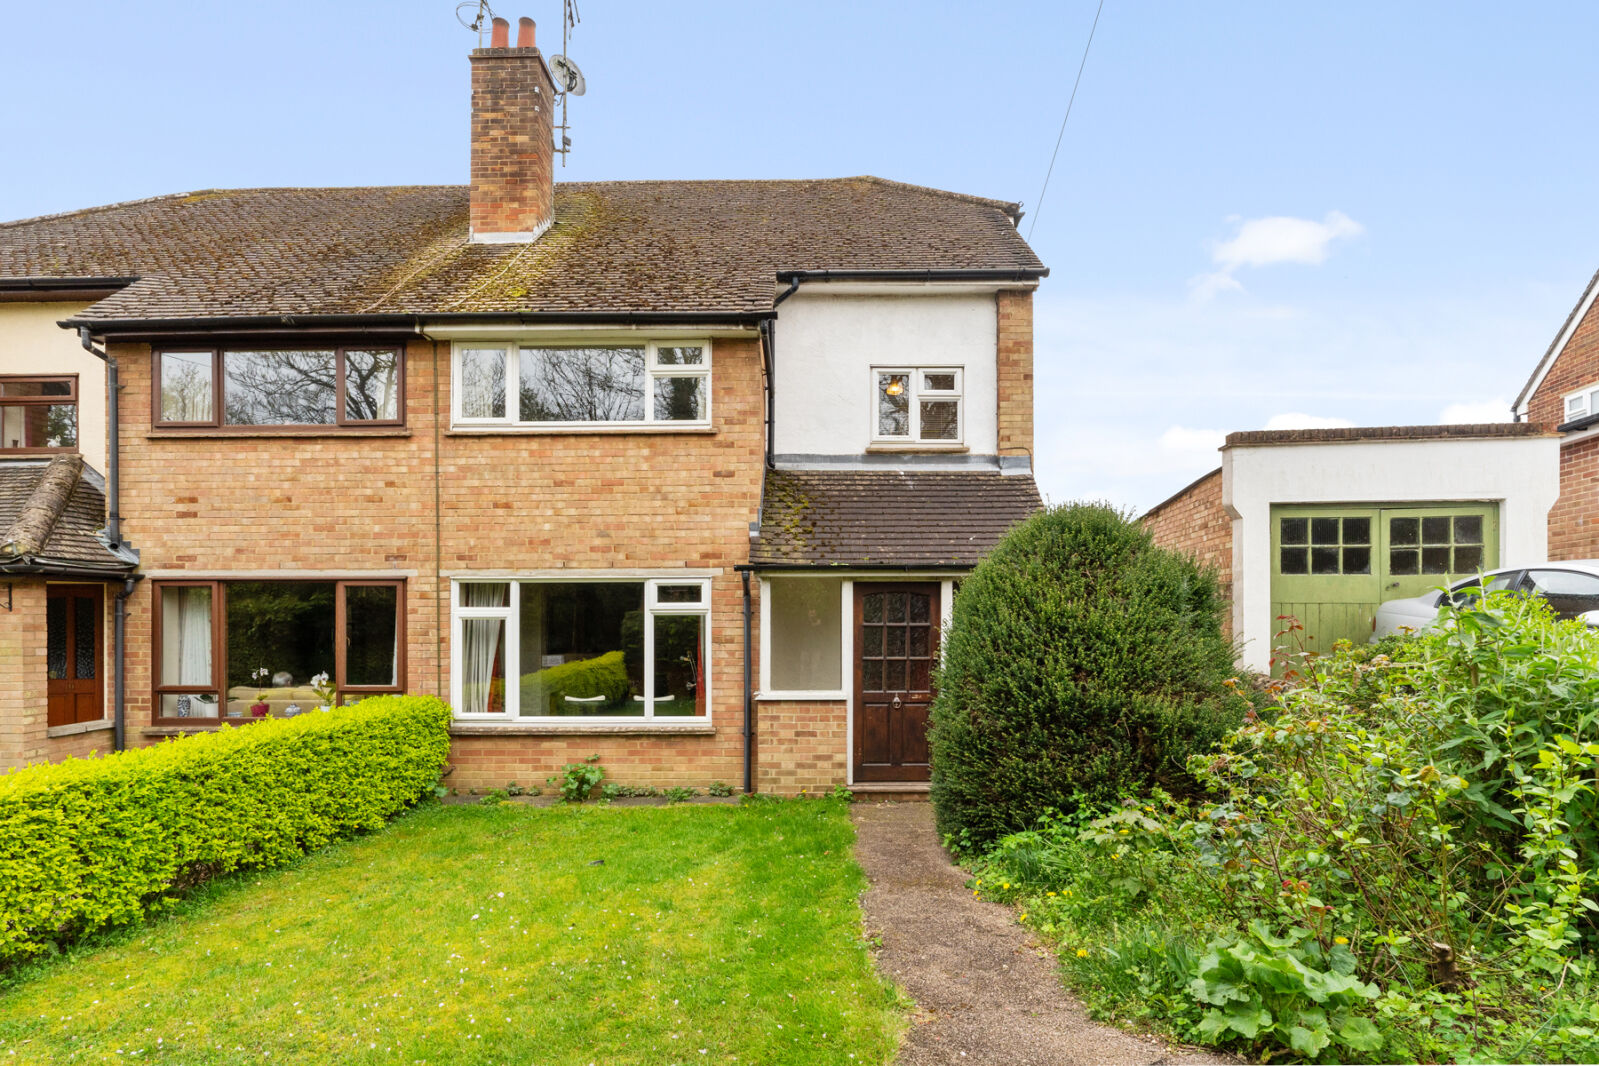 3 bedroom semi detached house for sale Brewery Lane, Stansted, CM24, main image